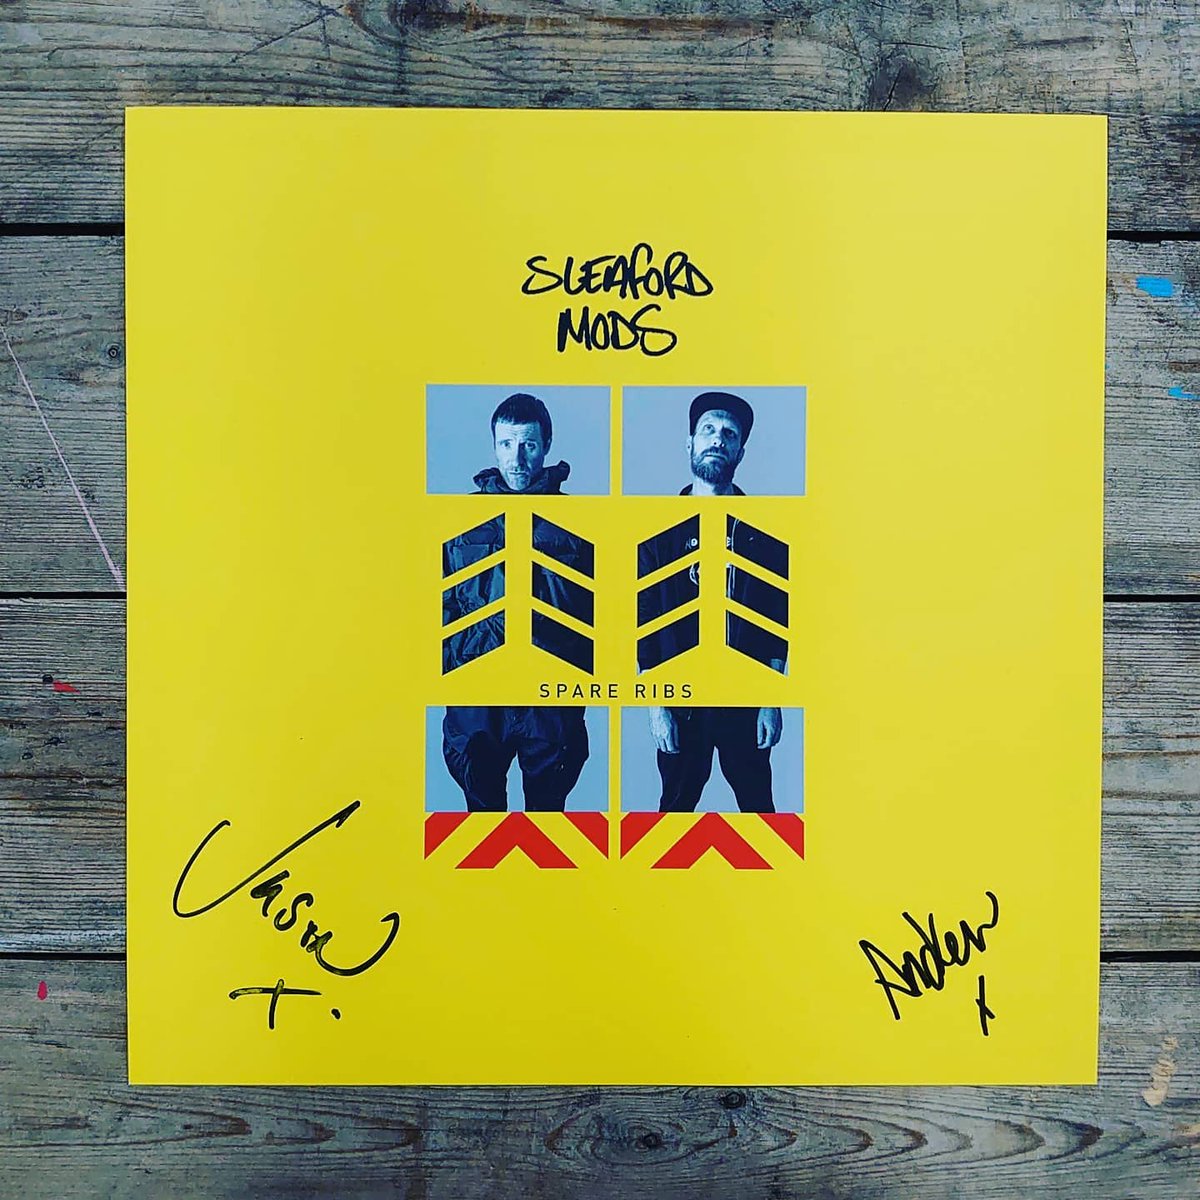 🏆 COMPETITION TIME 🏆 We have some @sleafordmods goodies to give away! Follow, like & retweet for 1 entry Preorder 'Spare Ribs' on any format bit.ly/3nozWgF for a bonus entry 1st 🏆: Signed Test Pressing 2nd & 3rd: Signed Print Winners announced 15/1/21 Good luck!